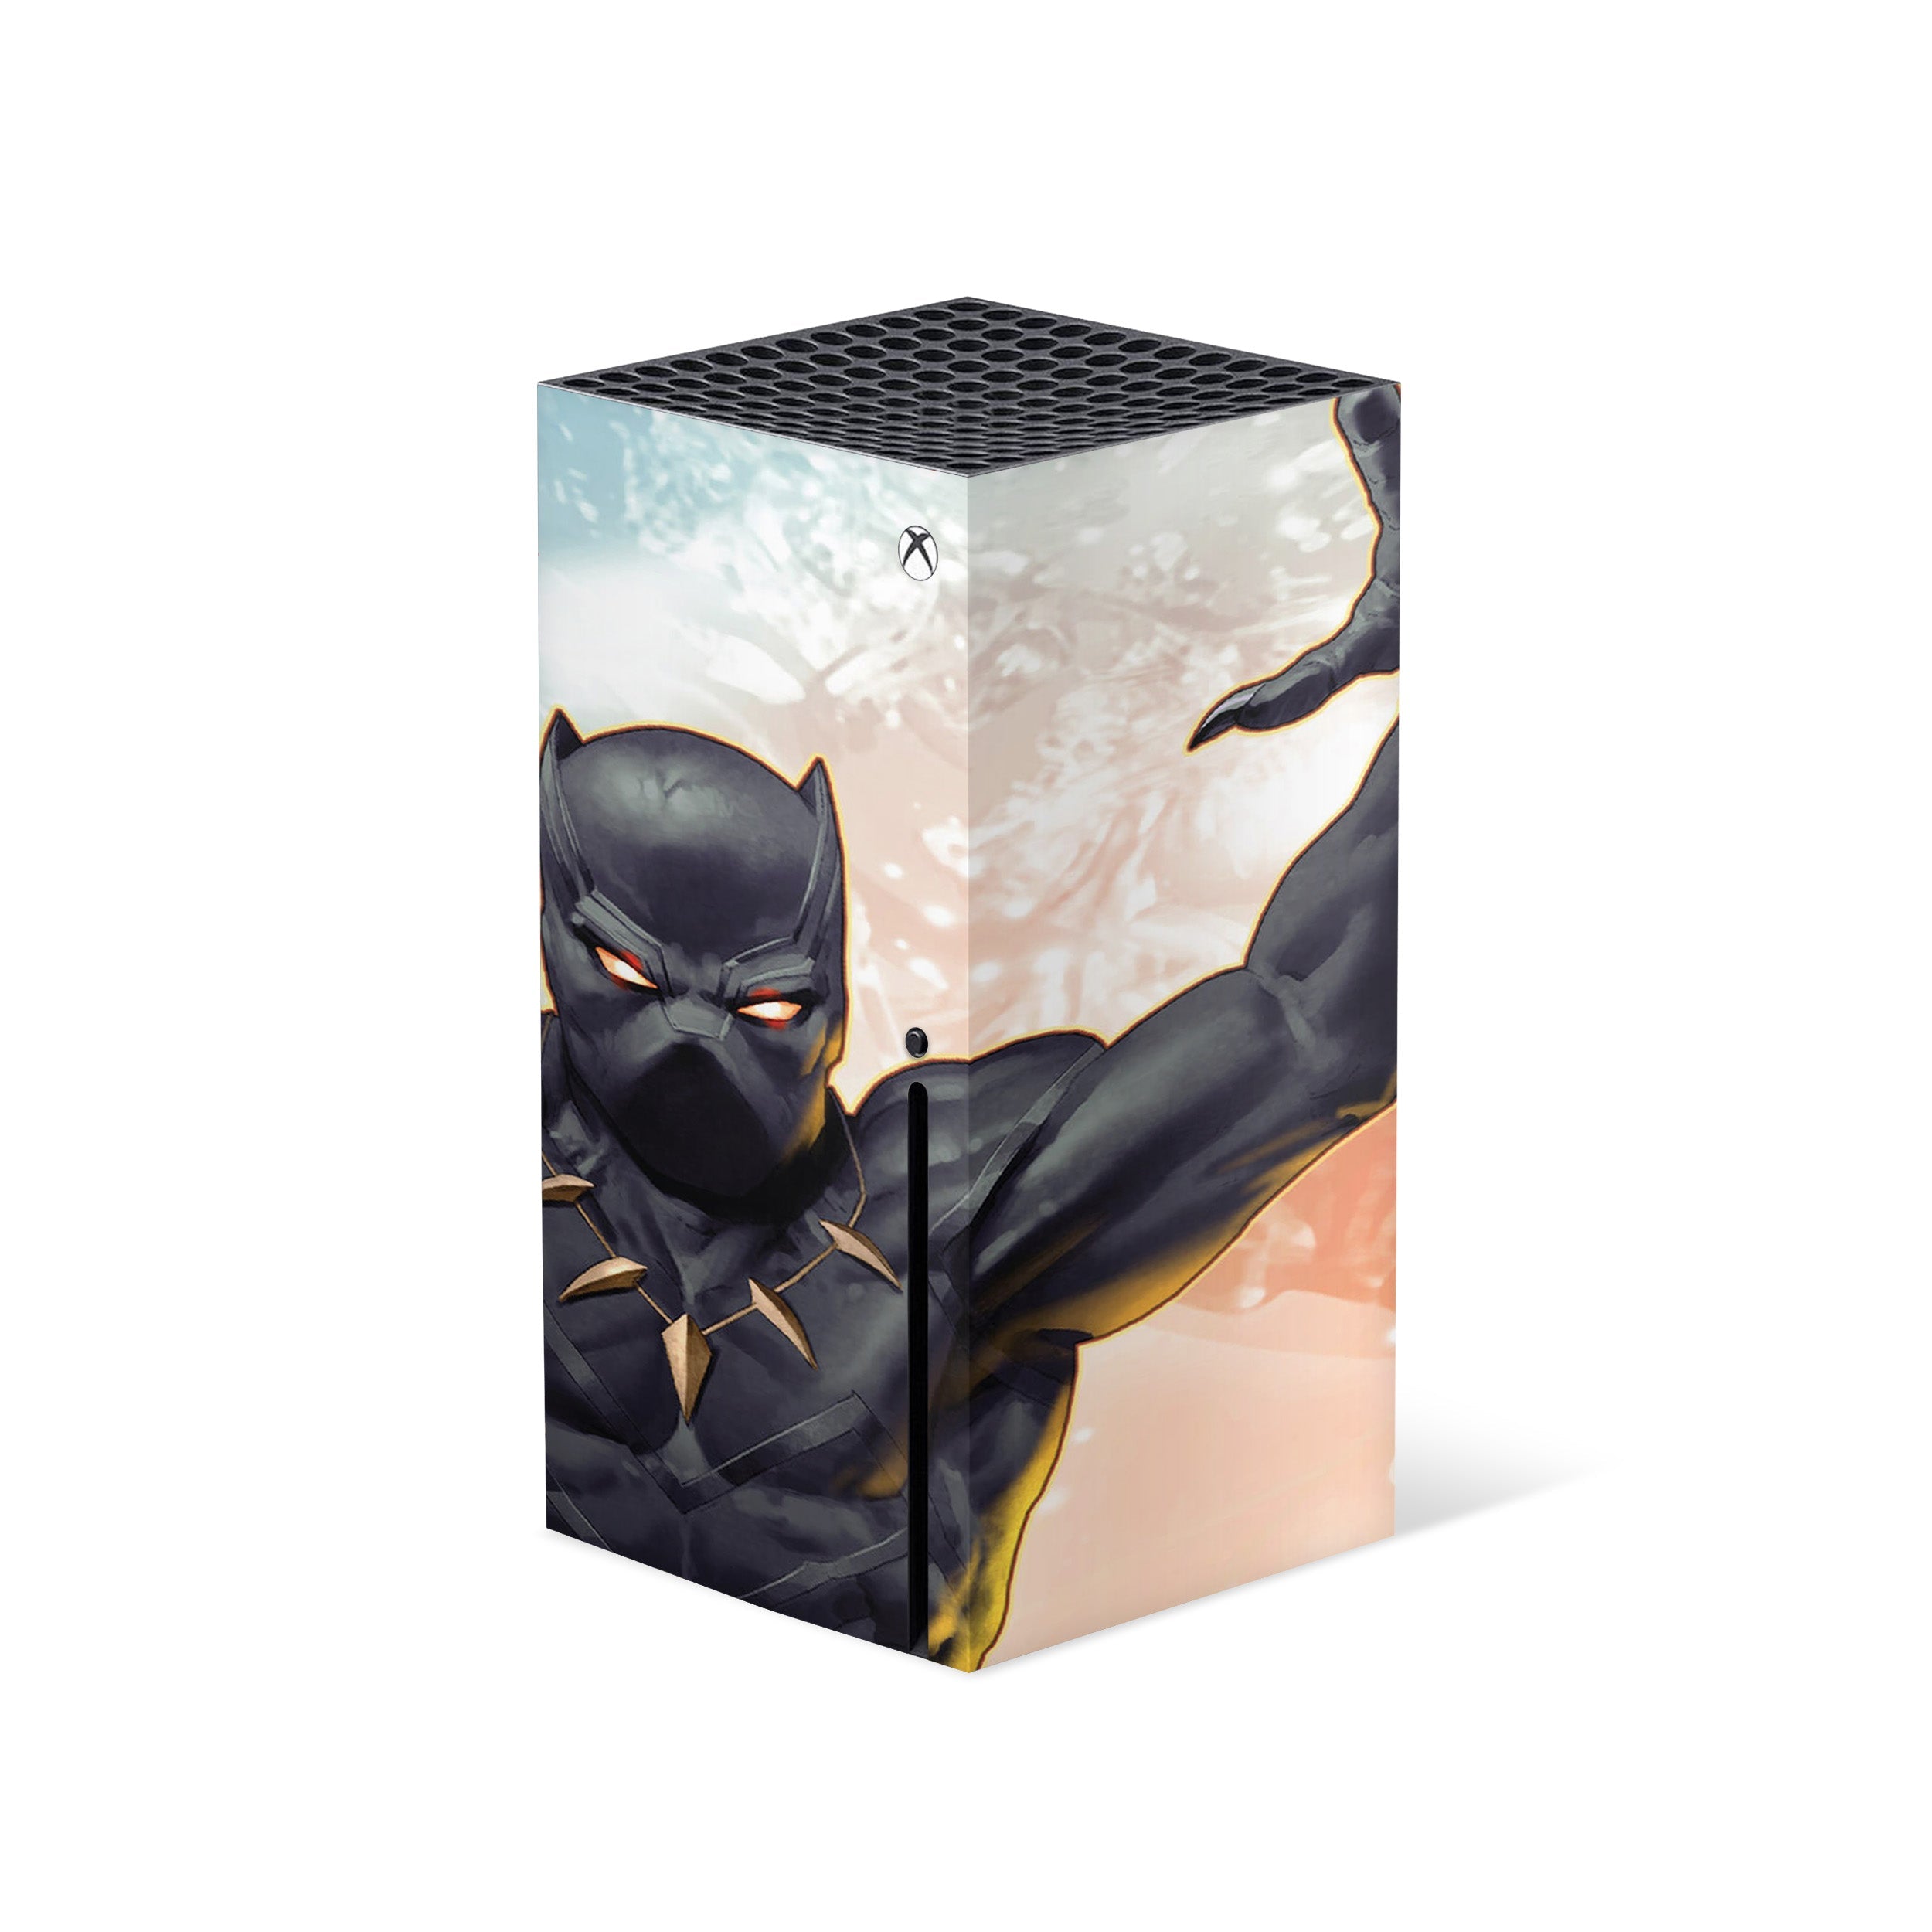 A video game skin featuring a Marvel Comics Black Panther design for the Xbox Series X.